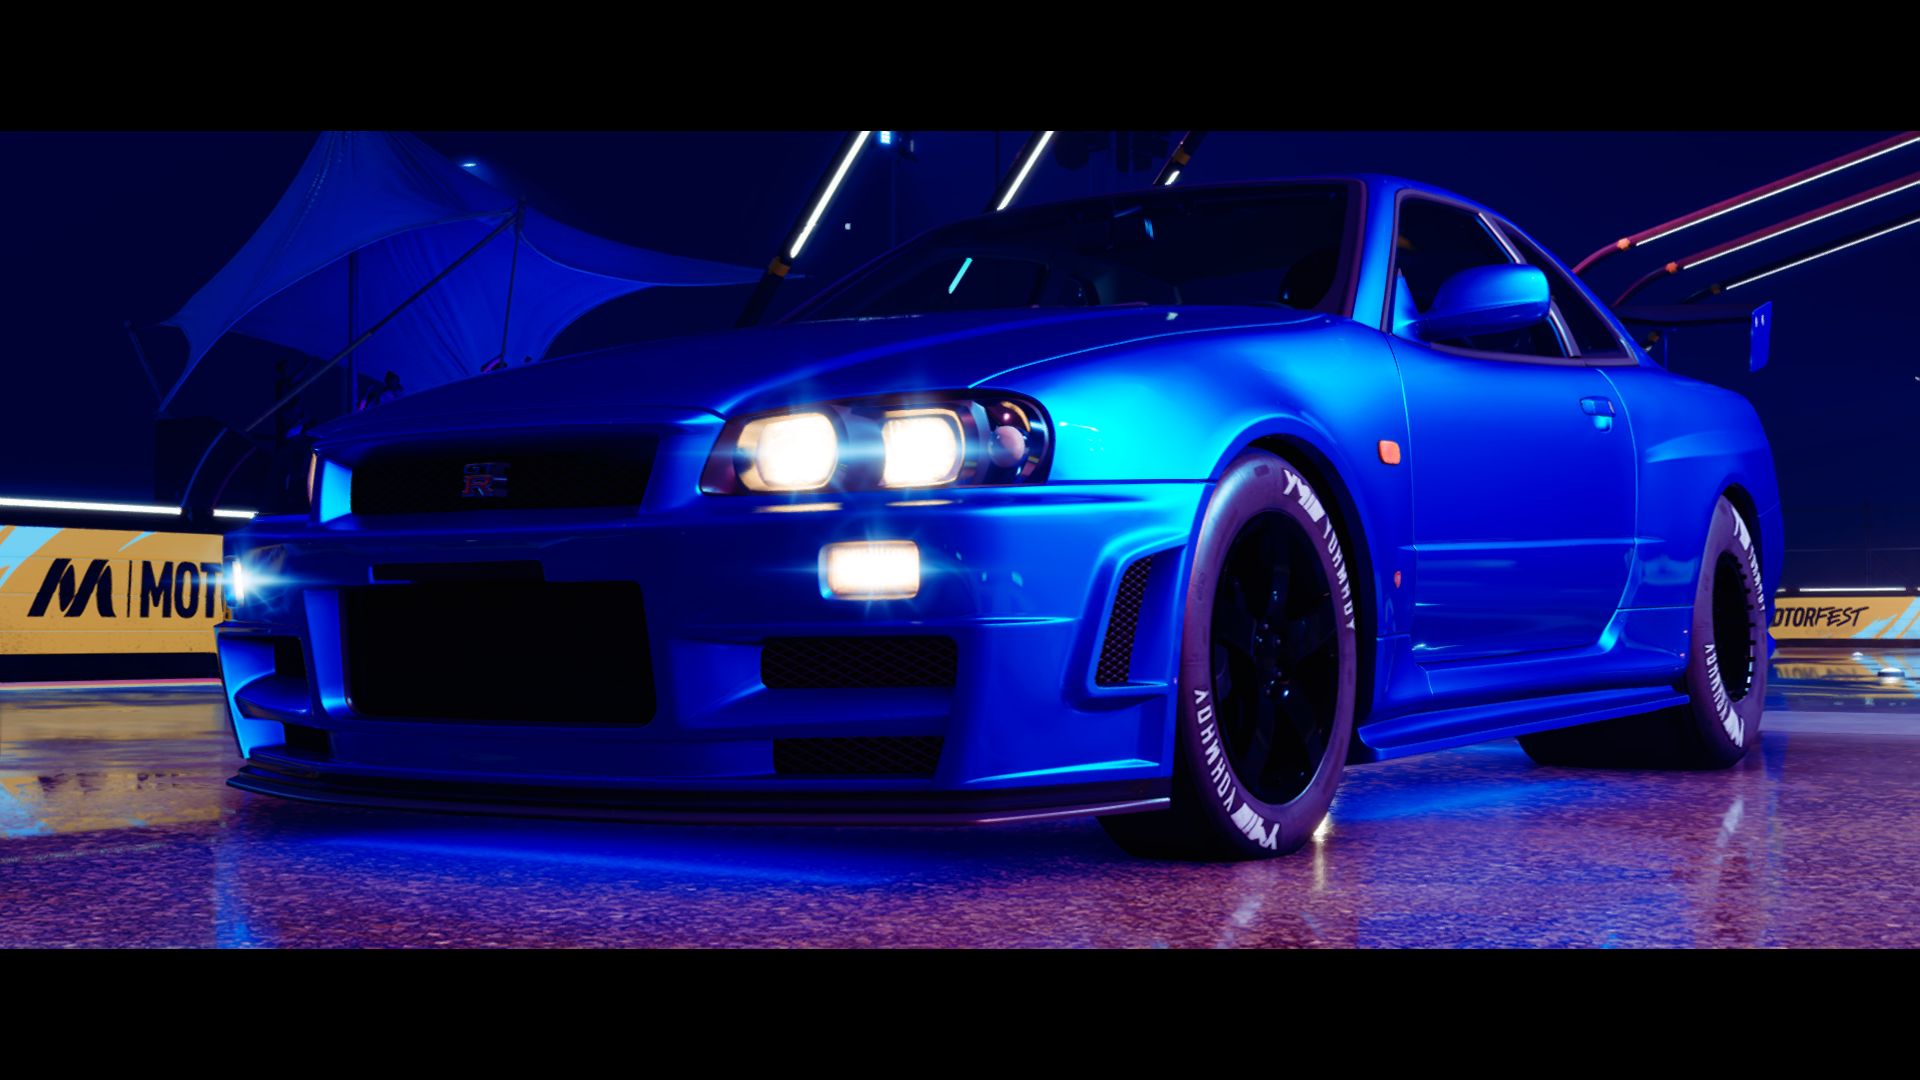 General 1920x1080 Japanese cars The Crew Nissan Nissan GT-R video games Ubisoft Nissan Skyline R34 car frontal view headlights reflection